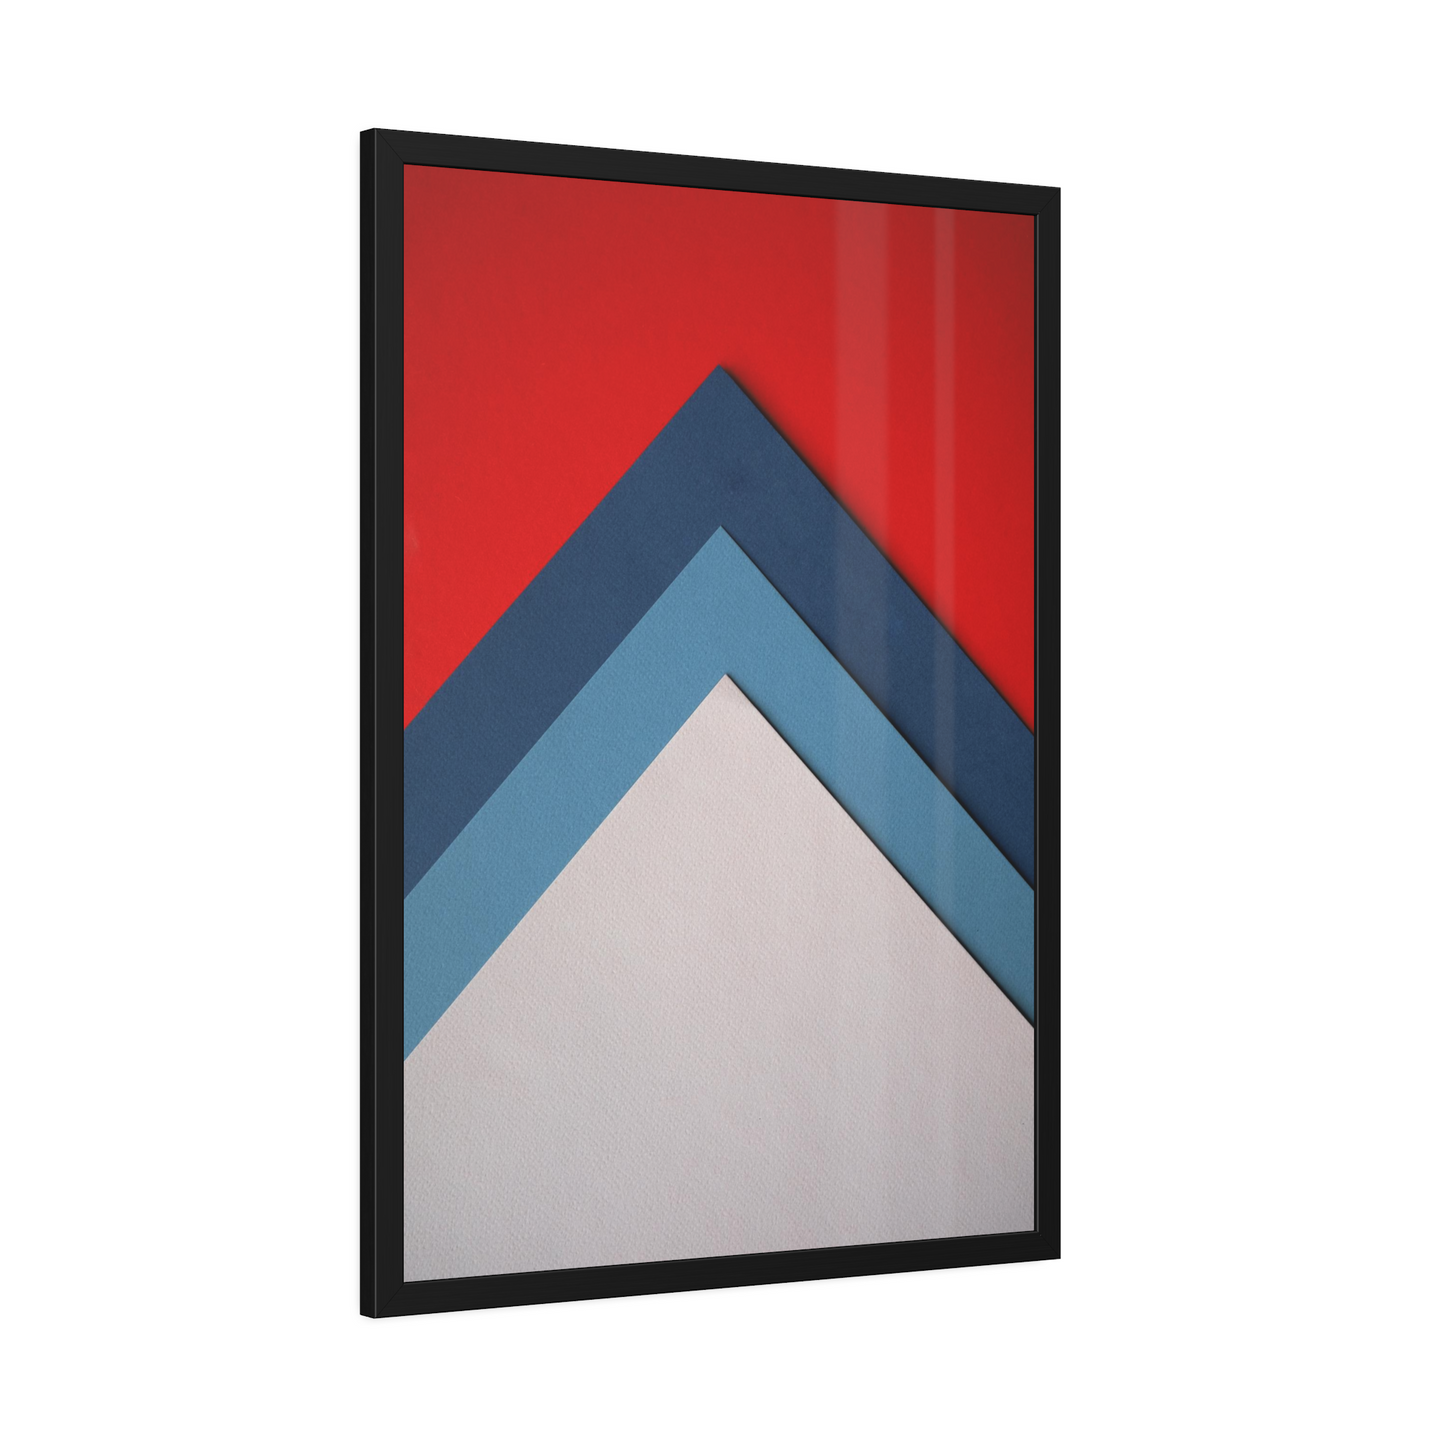 Artistic Minimalist Canvas: Abstract Design for Modern Wall Art